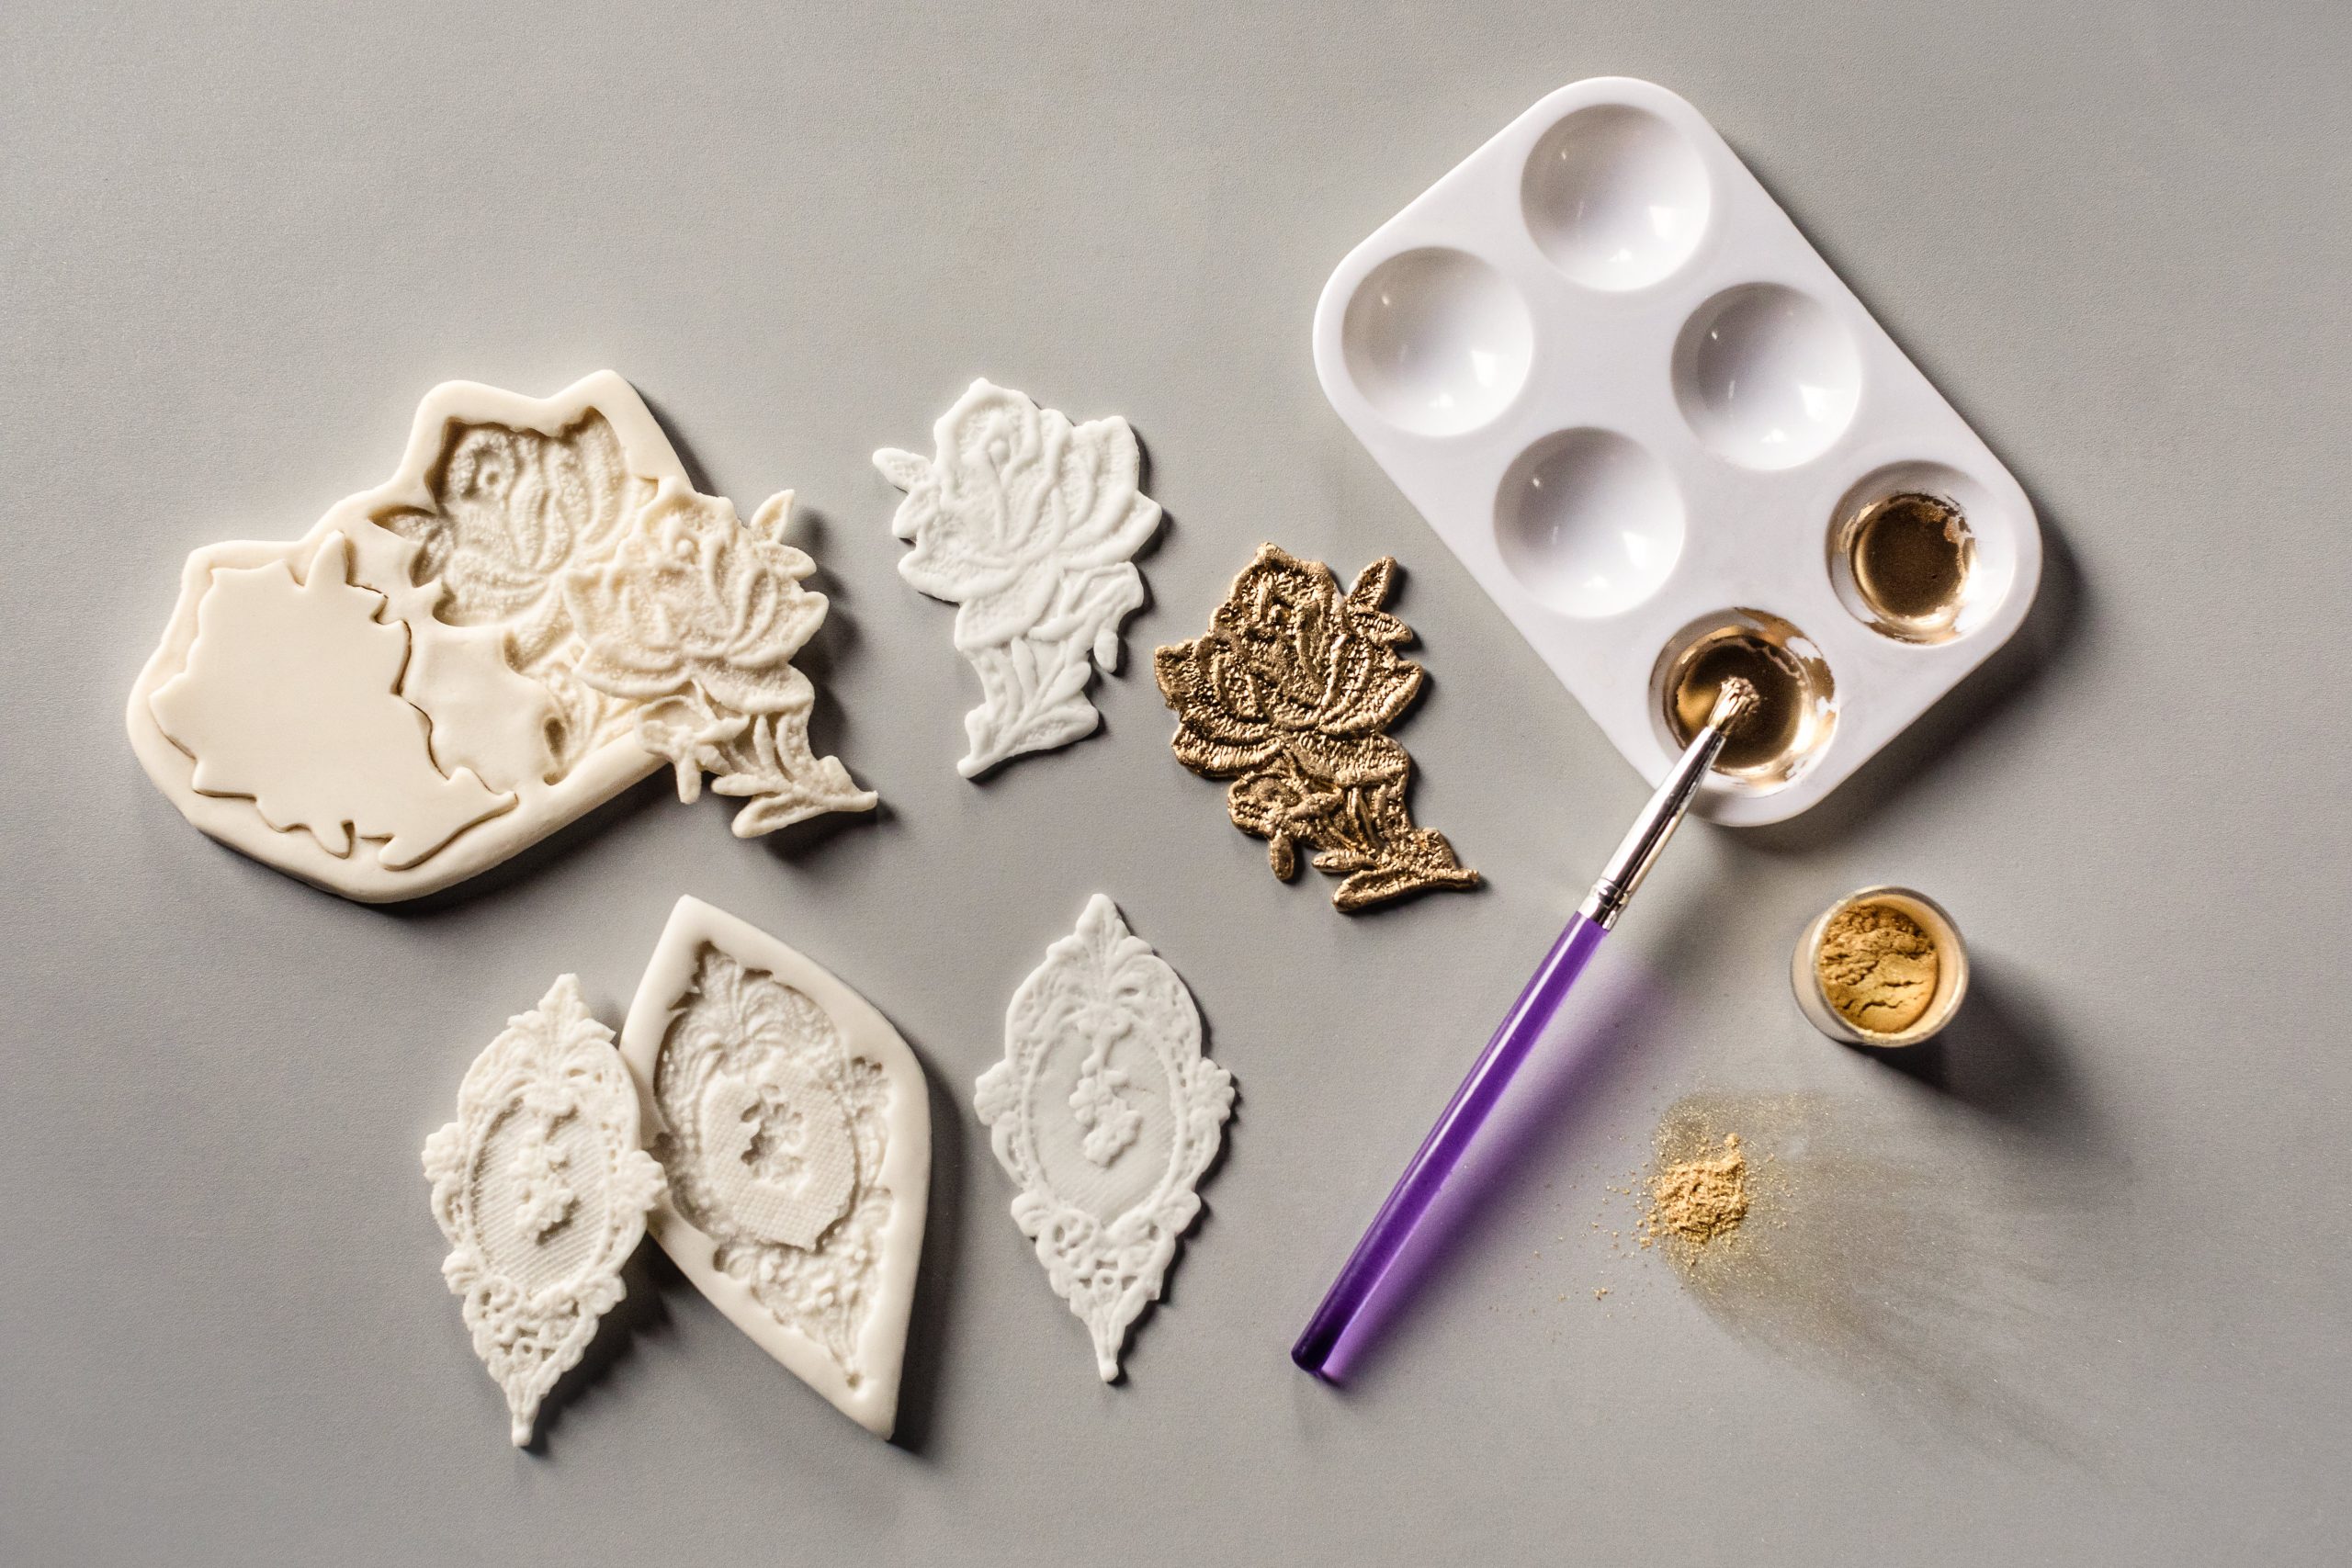 A beautiful fondant lace gilded detail. Tutorial by master sugar artist Ana Parzych